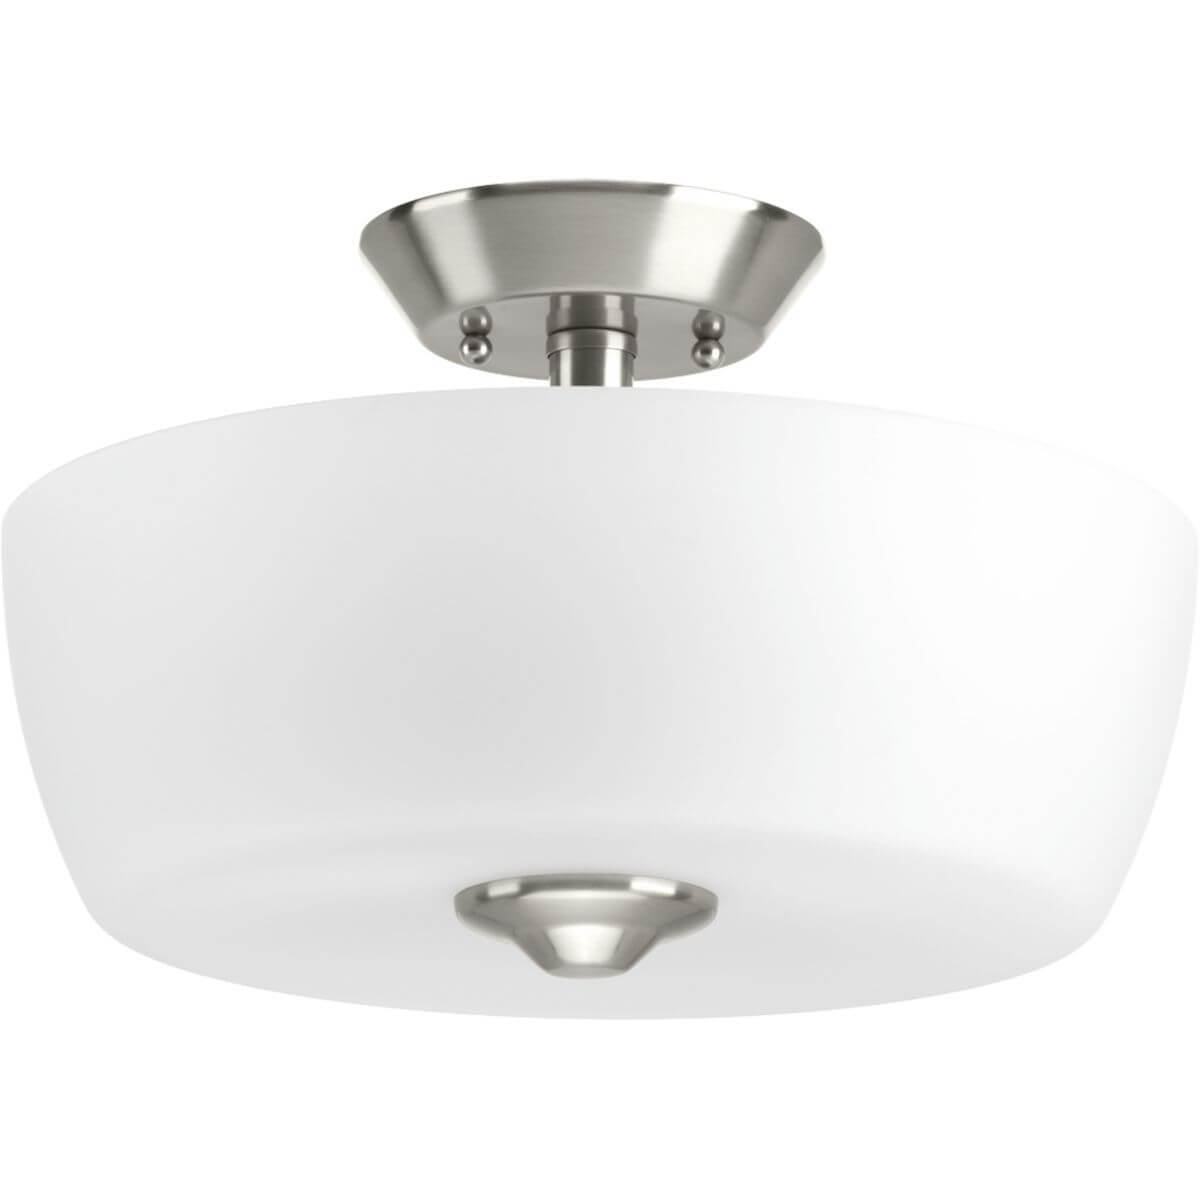 Progress Lighting Leap 2 Light 14 inch Semi-Flush Mount in Brushed Nickel with Etched Glass P350060-009